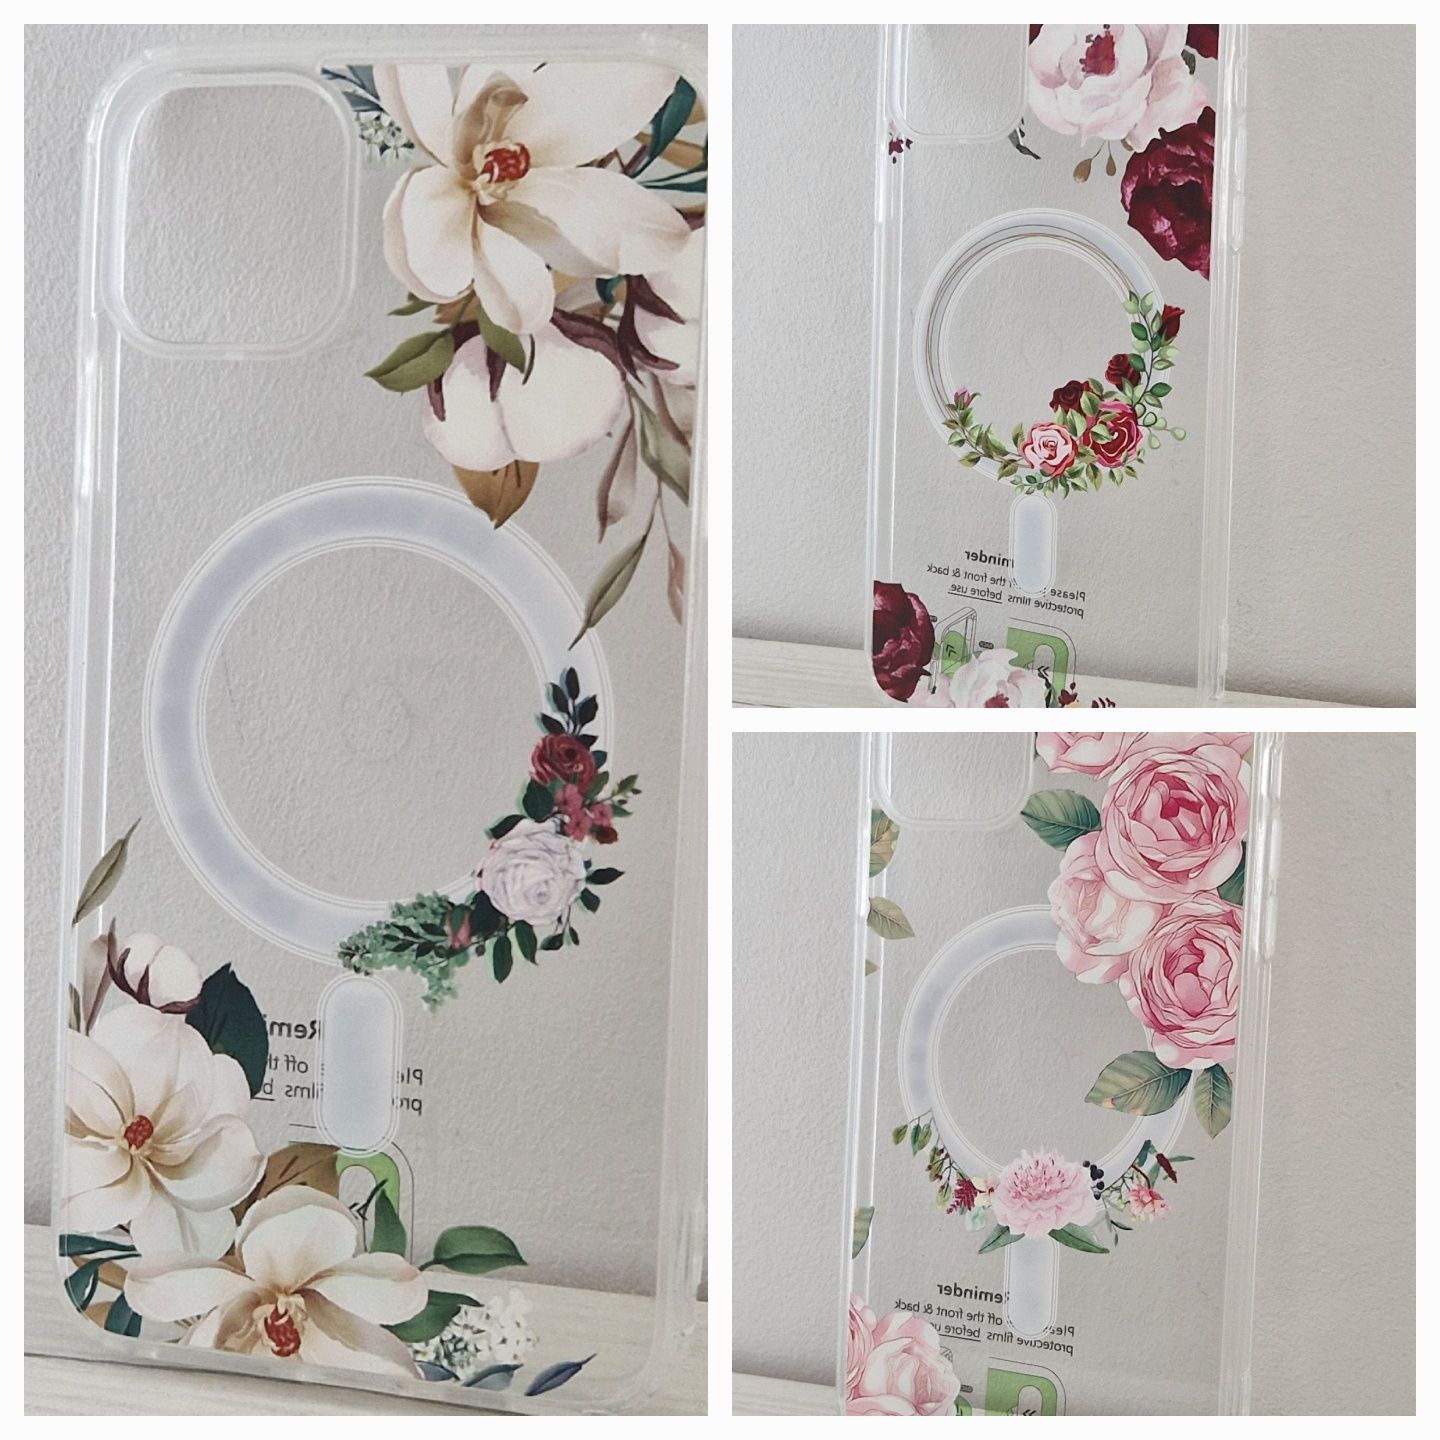 Tel Protect Flower Magsafe do Iphone 12 Pro Max ( trzy wzory)